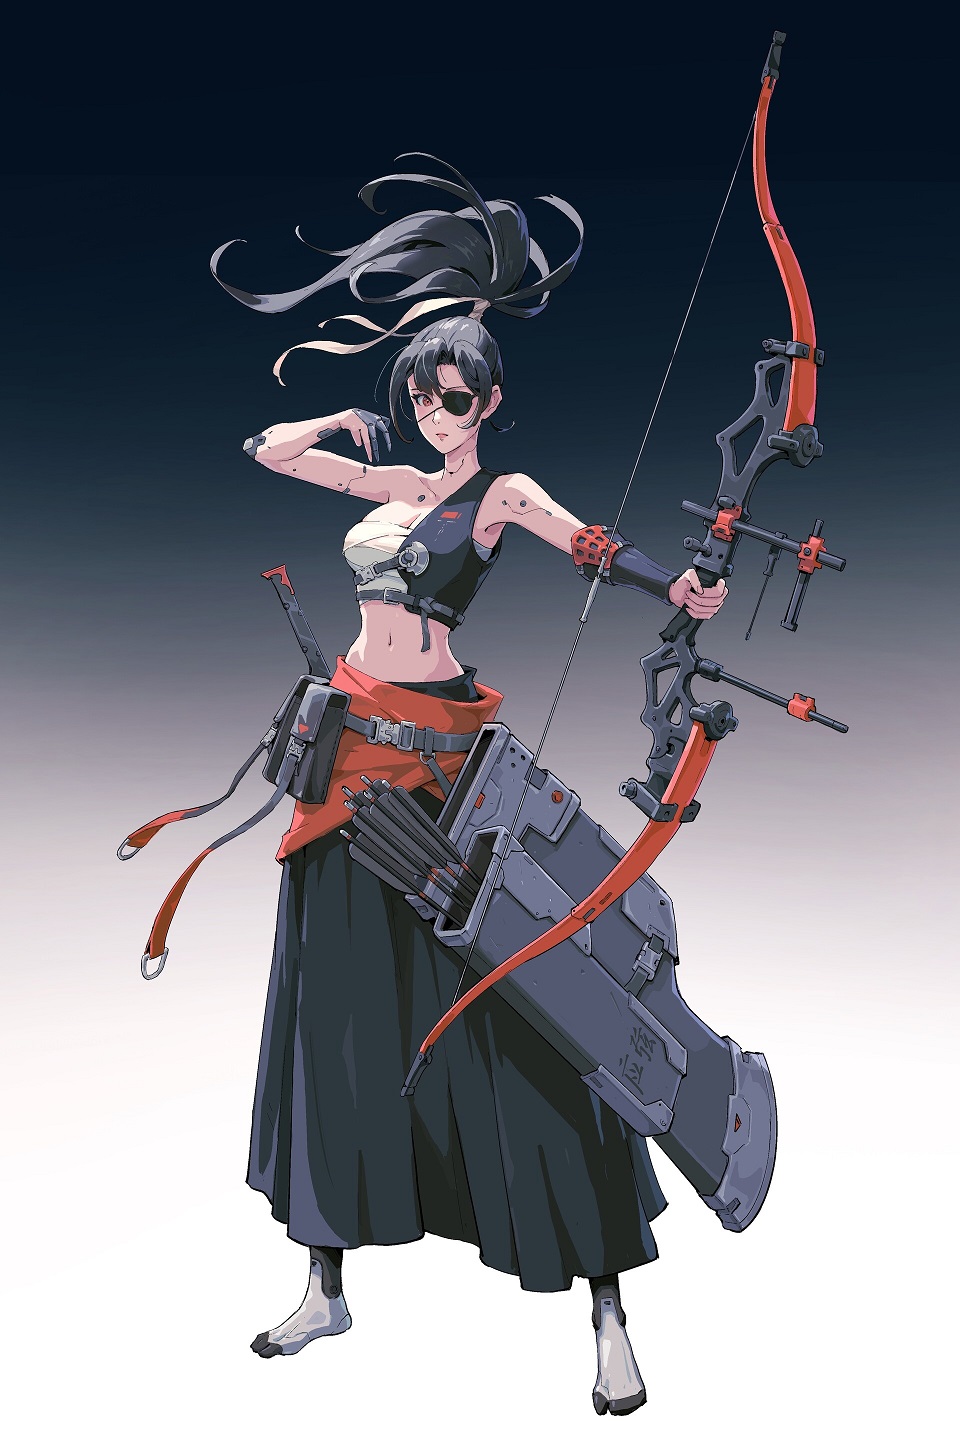 Wenfei Ye Drawing Women Dark Hair Skirt Arrows Bow Science Fiction Wind Eyepatches Archer Vertical A 960x1440